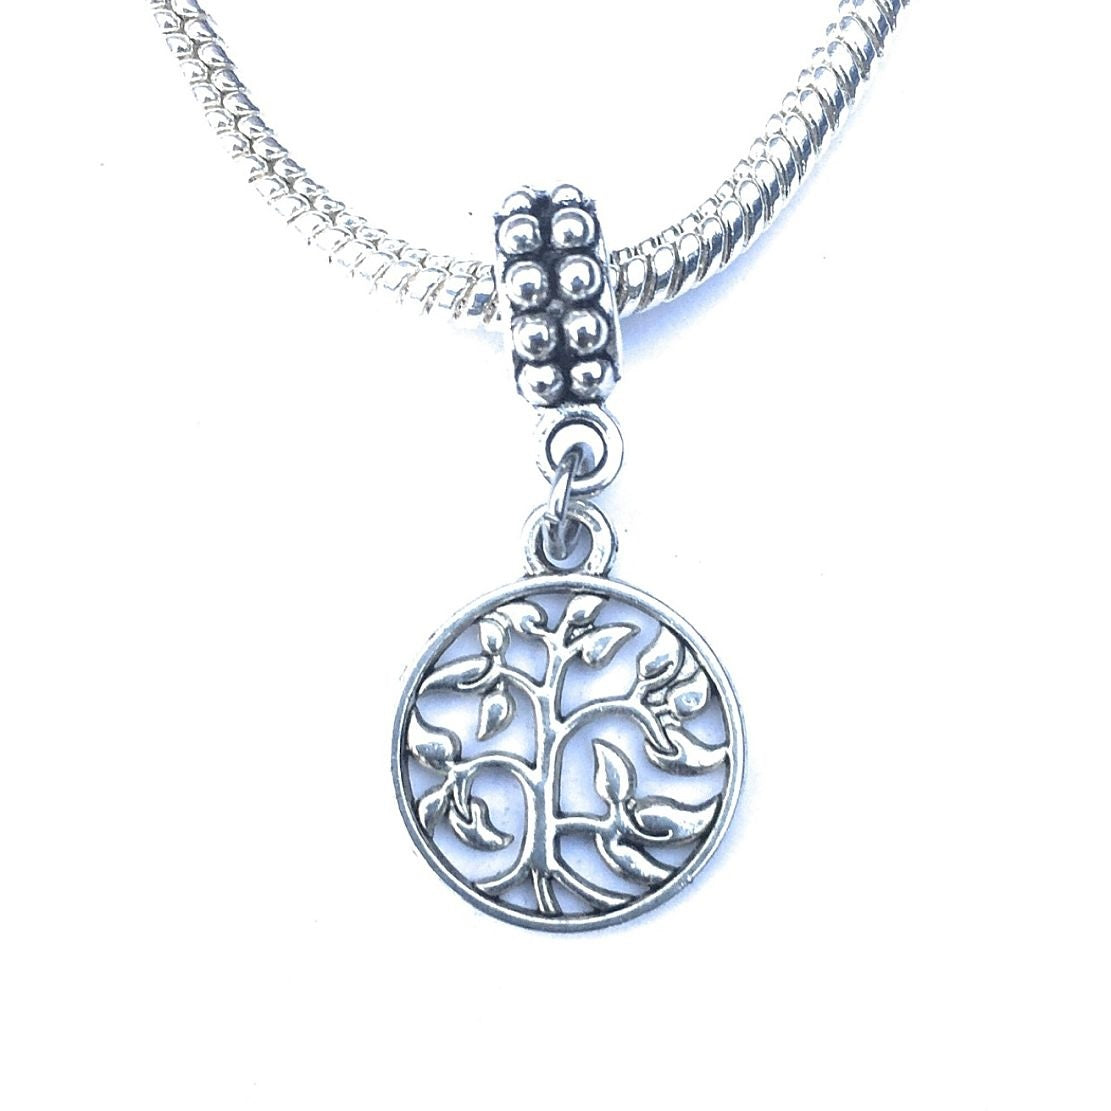 Silver Tree of Life Charm Bead for Bracelet.